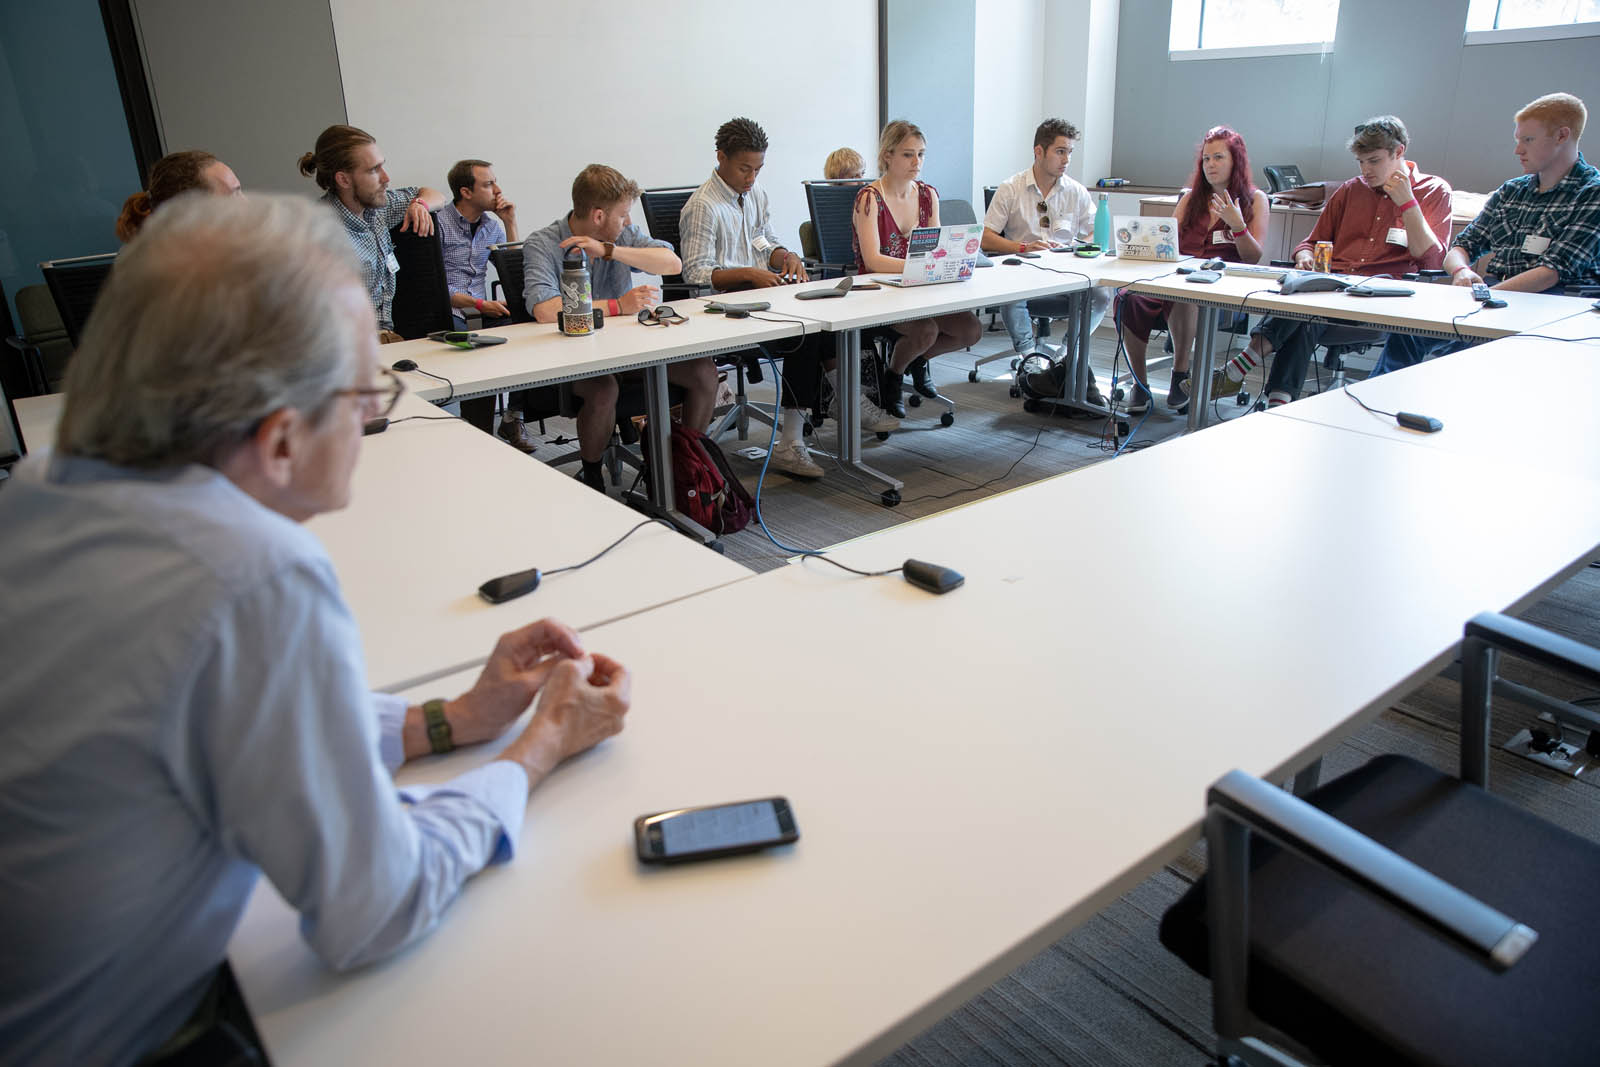 Peter Breslow, senior producer of NPR’s Weekend Edition (far left), listens as students of Introduction to Journalism present their final projects during a class trip to NPR’s headquarters in Washington, DC, June 20, 2019. Photo by Lydia Thompson.